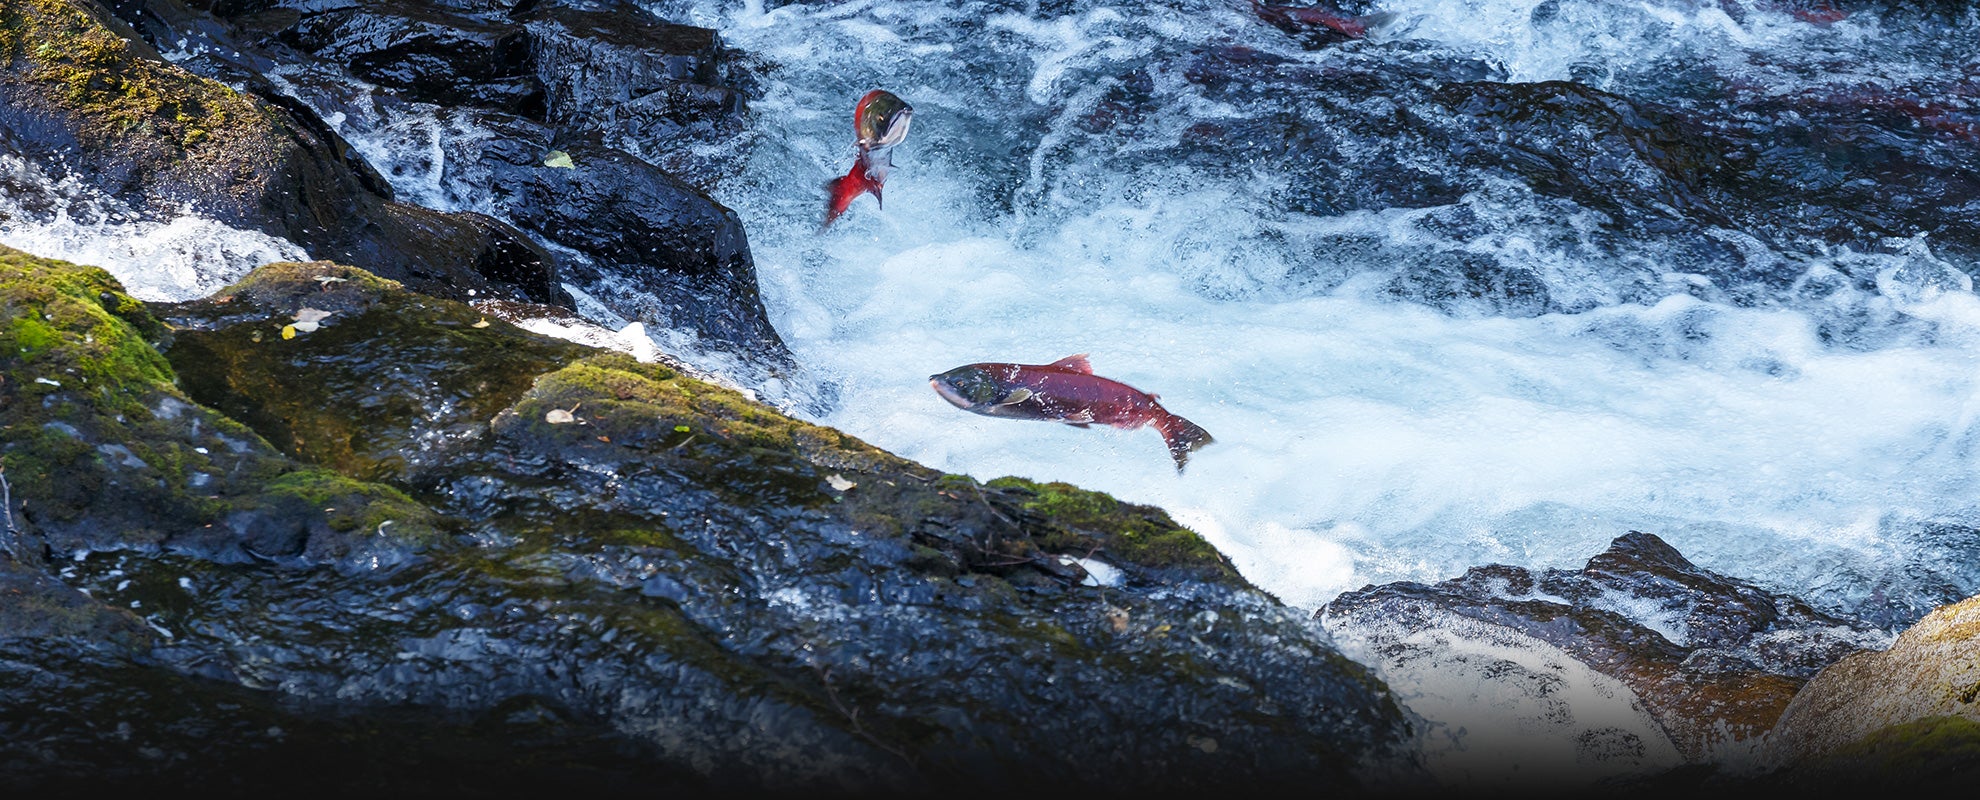 Salmon jump up a river to spawn the next generation.